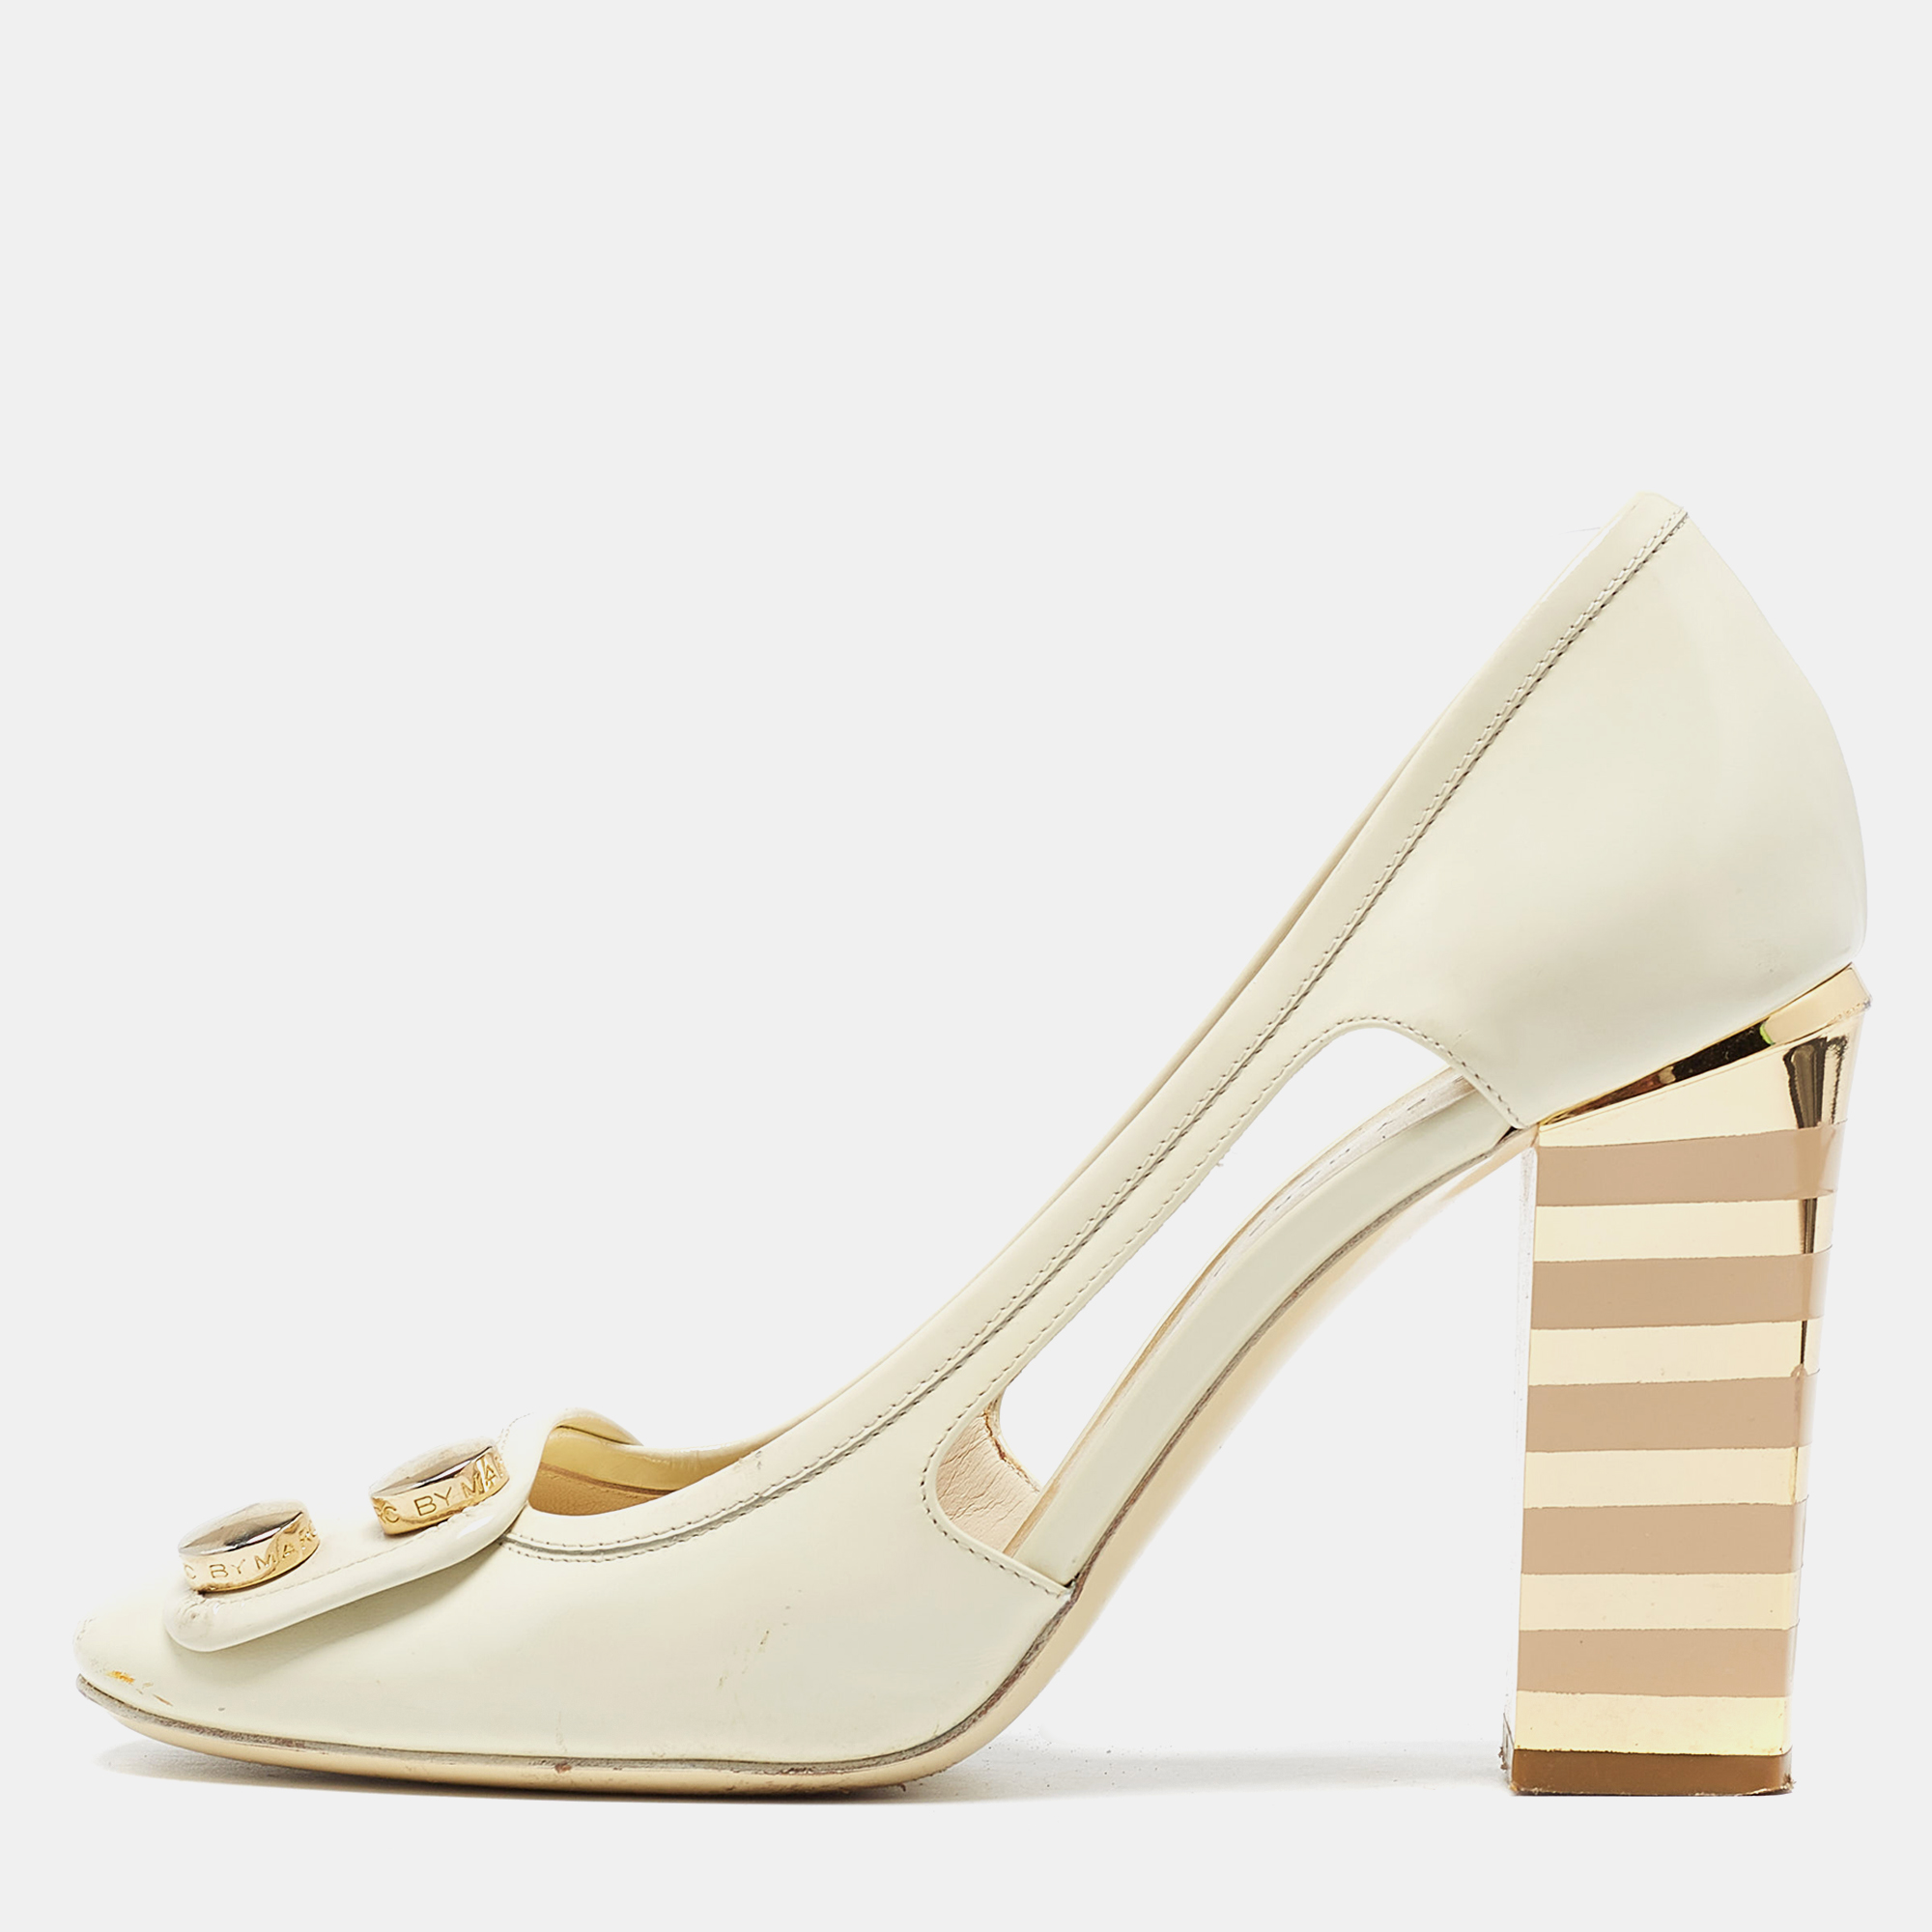 Marc by marc jacobs cream leather cutout pumps size 37